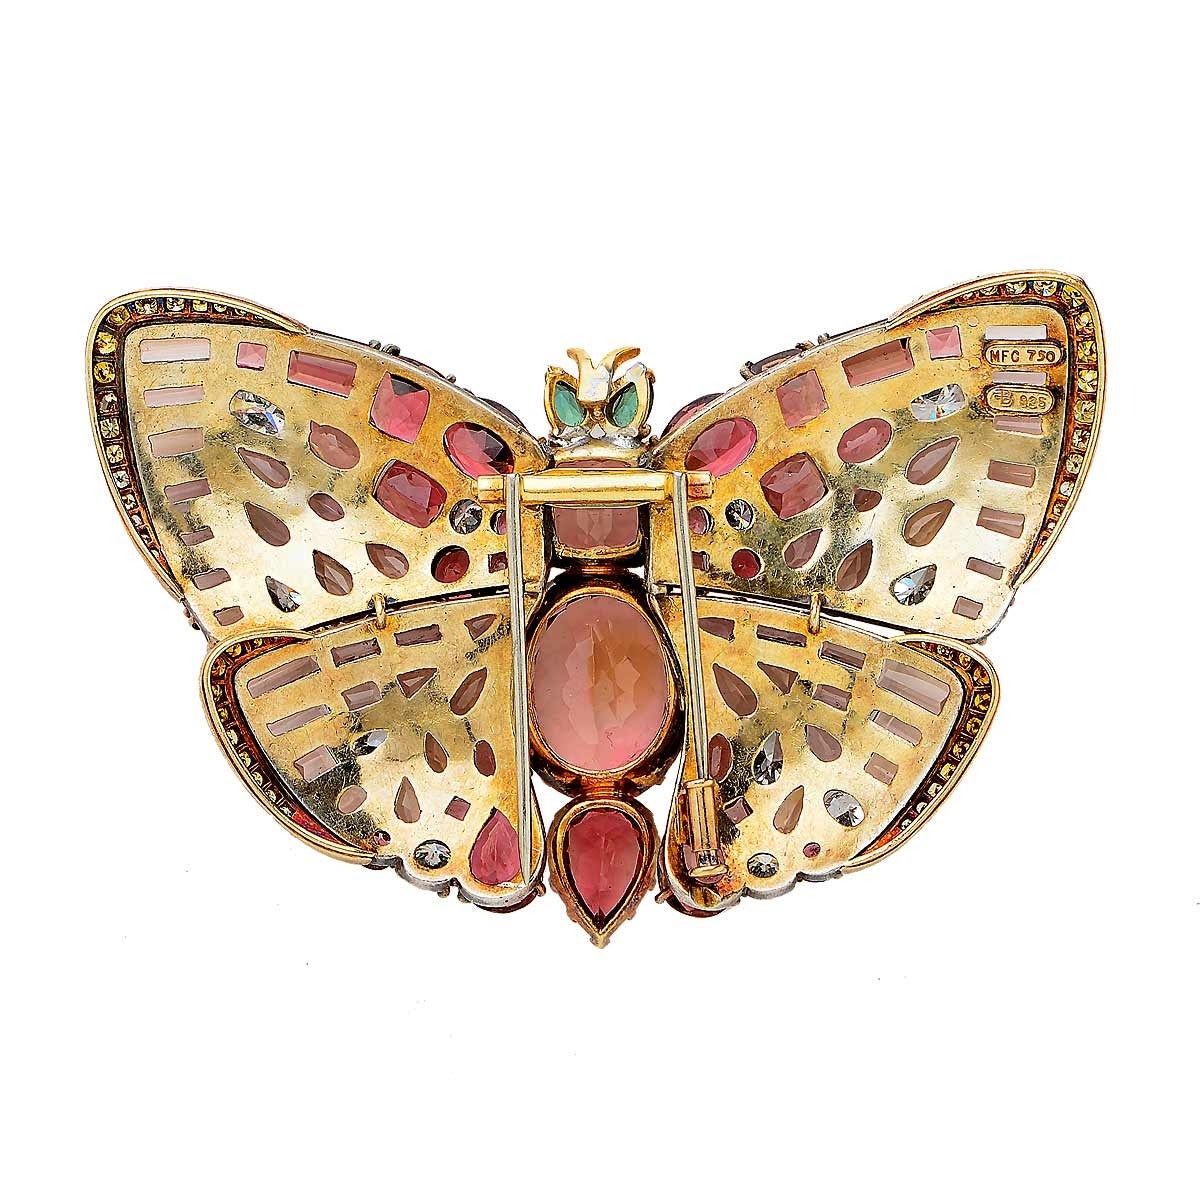 Marilyn Cooperman - 18kt Yellow Gold Diamond, Topaz and Tourmaline Butterfly Pin Featuring 11 Mixed Cut Diamonds with an Estimated Total Weight of 4.5cts and 70 Mix Cut Topaz and Tourmaline with an Estimated Total Weight of 14cts Flanked by 56 Round